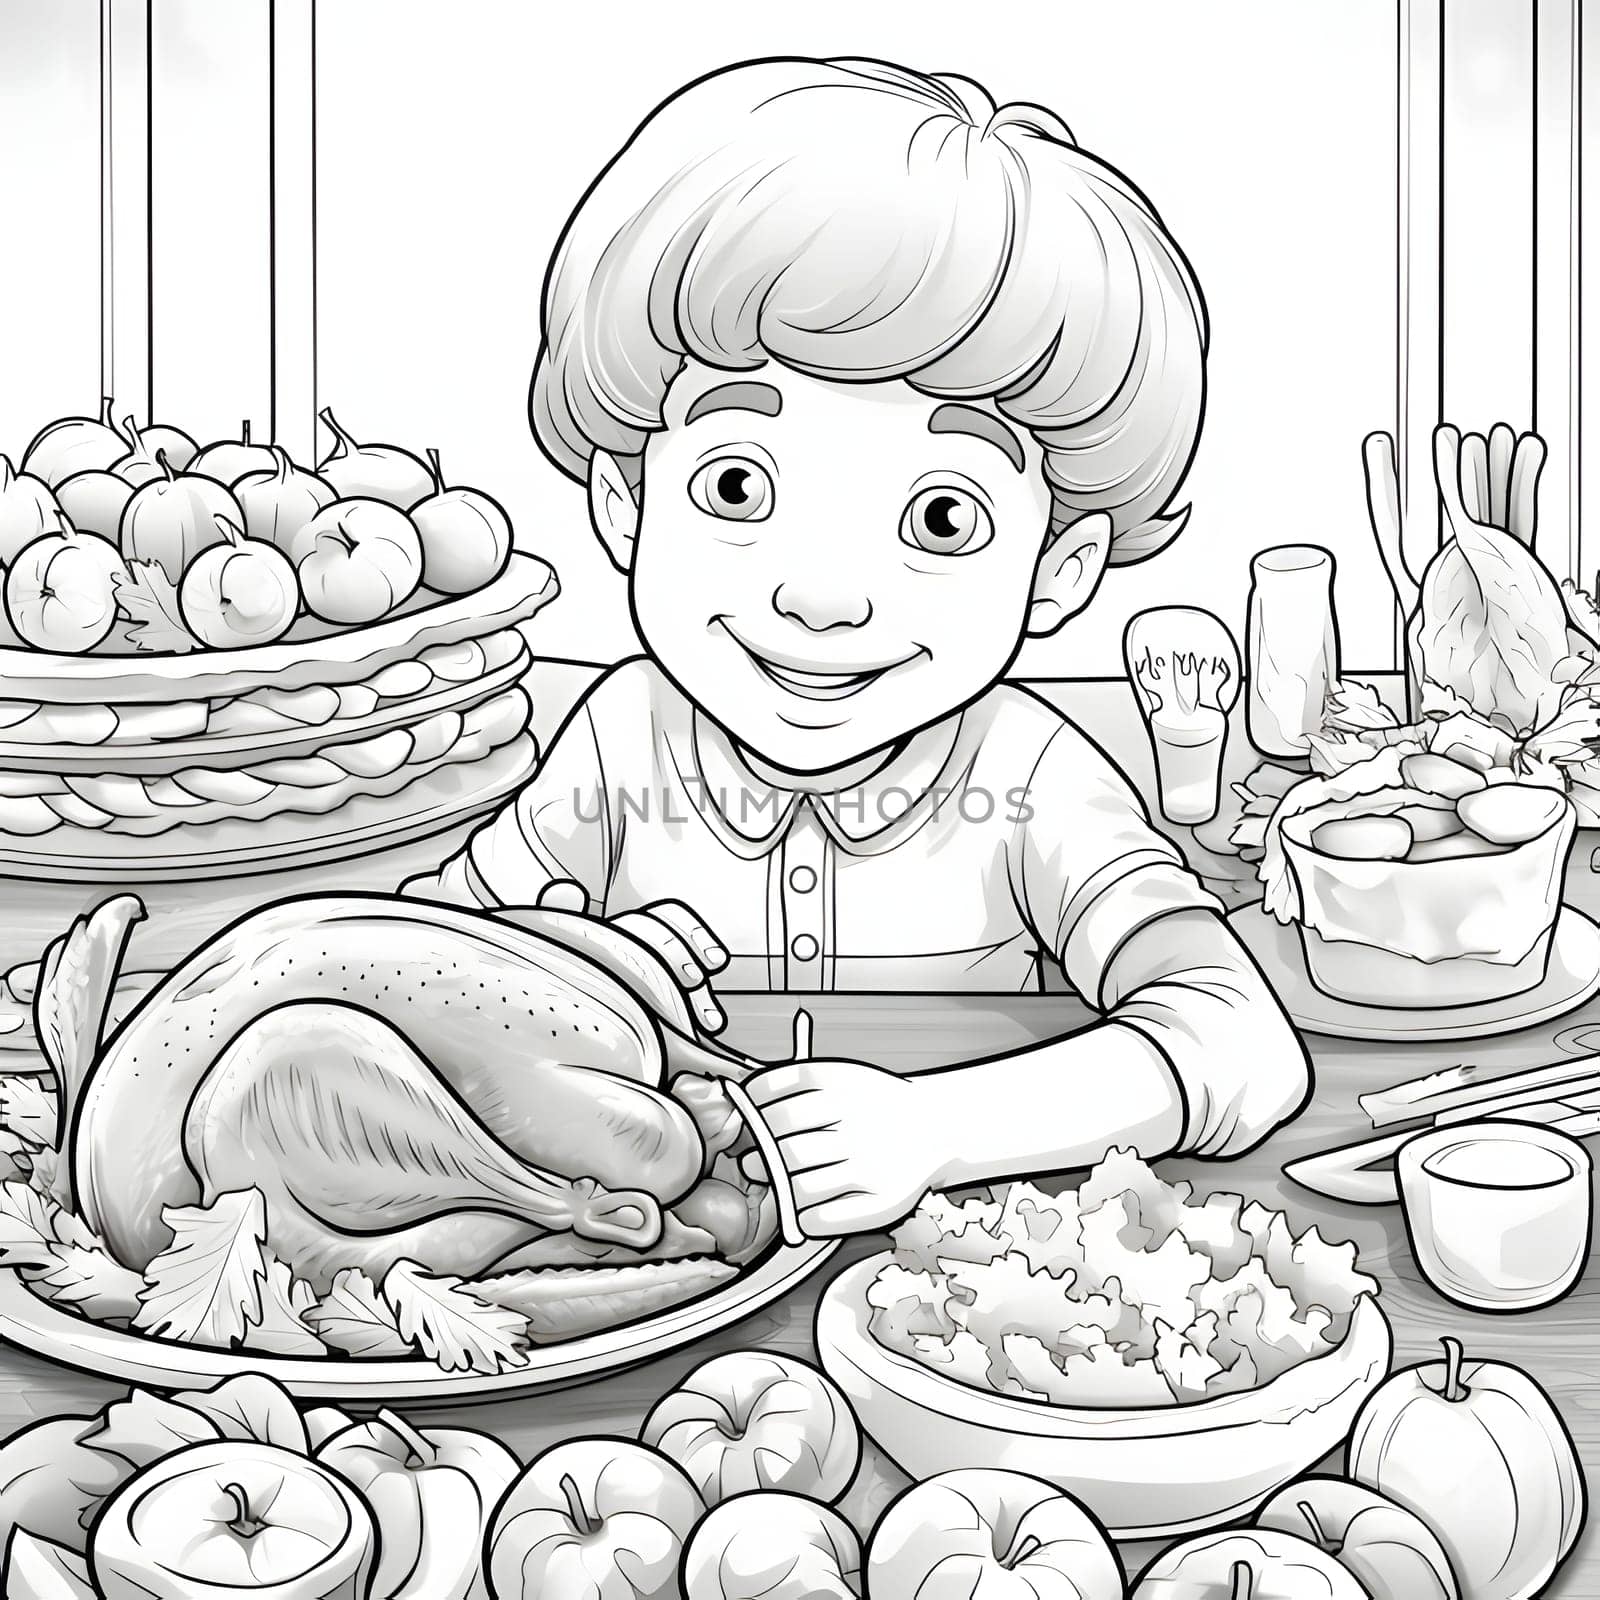 A little boy at the Thanksgiving Day table. Turkey as the main dish of thanksgiving for the harvest. Black and White coloring book. by ThemesS